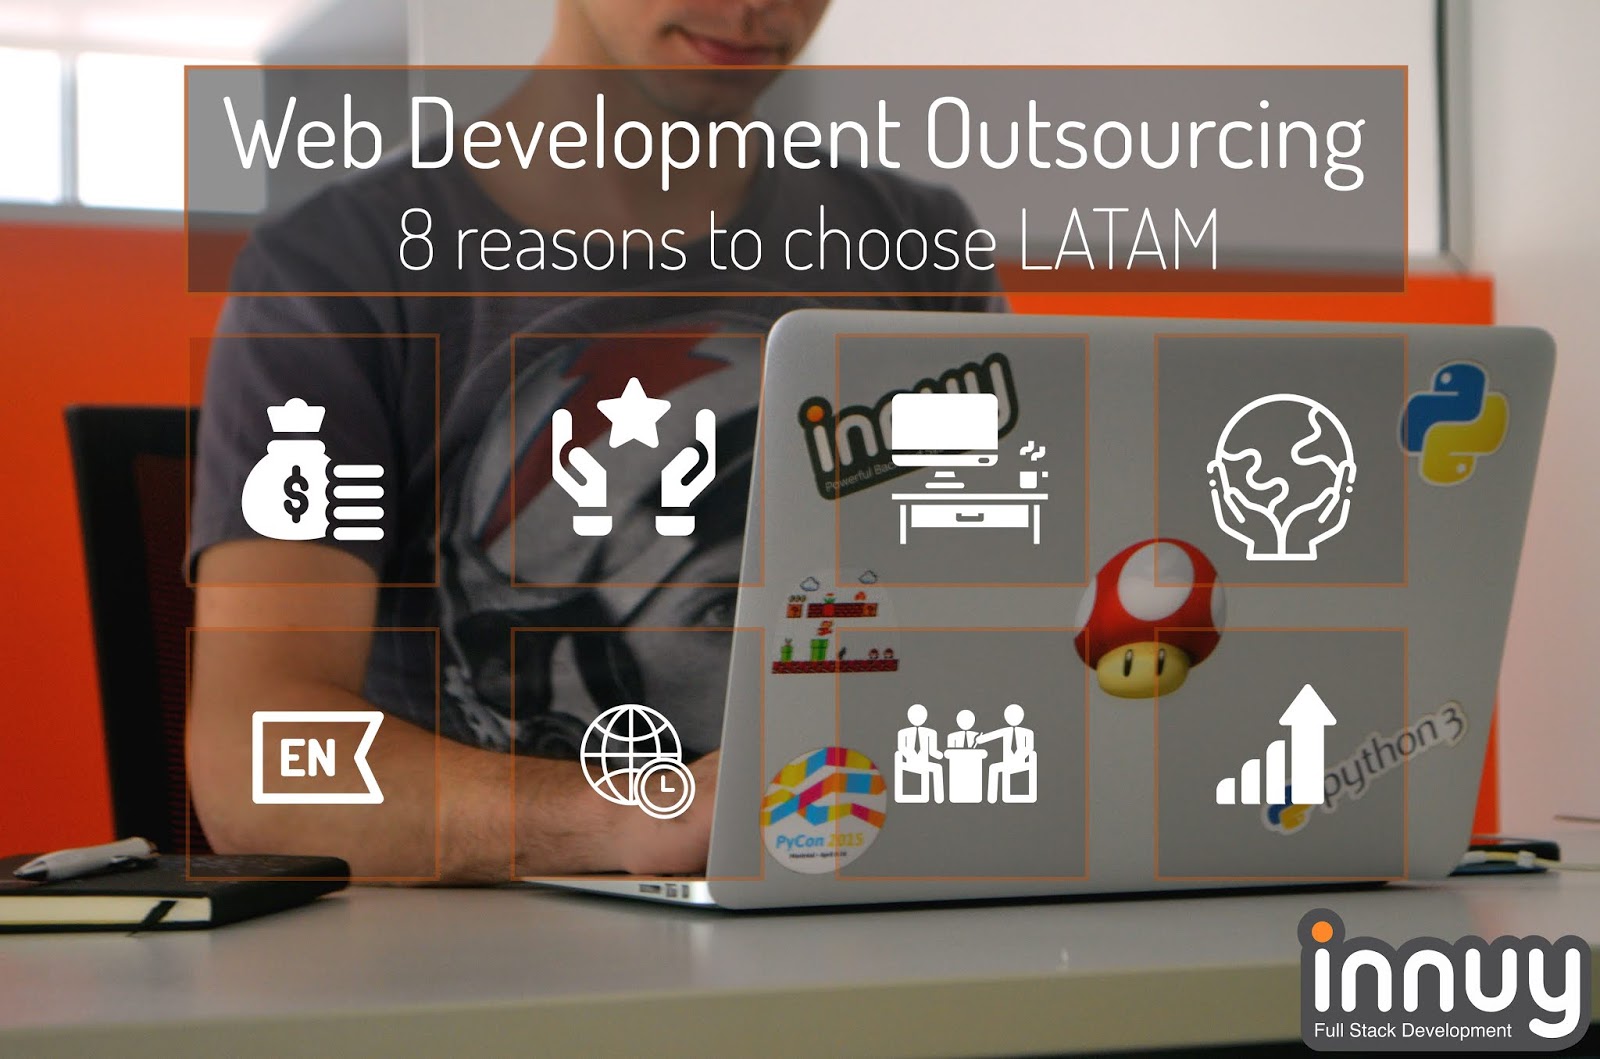 What do you mean by outsourcing web design?